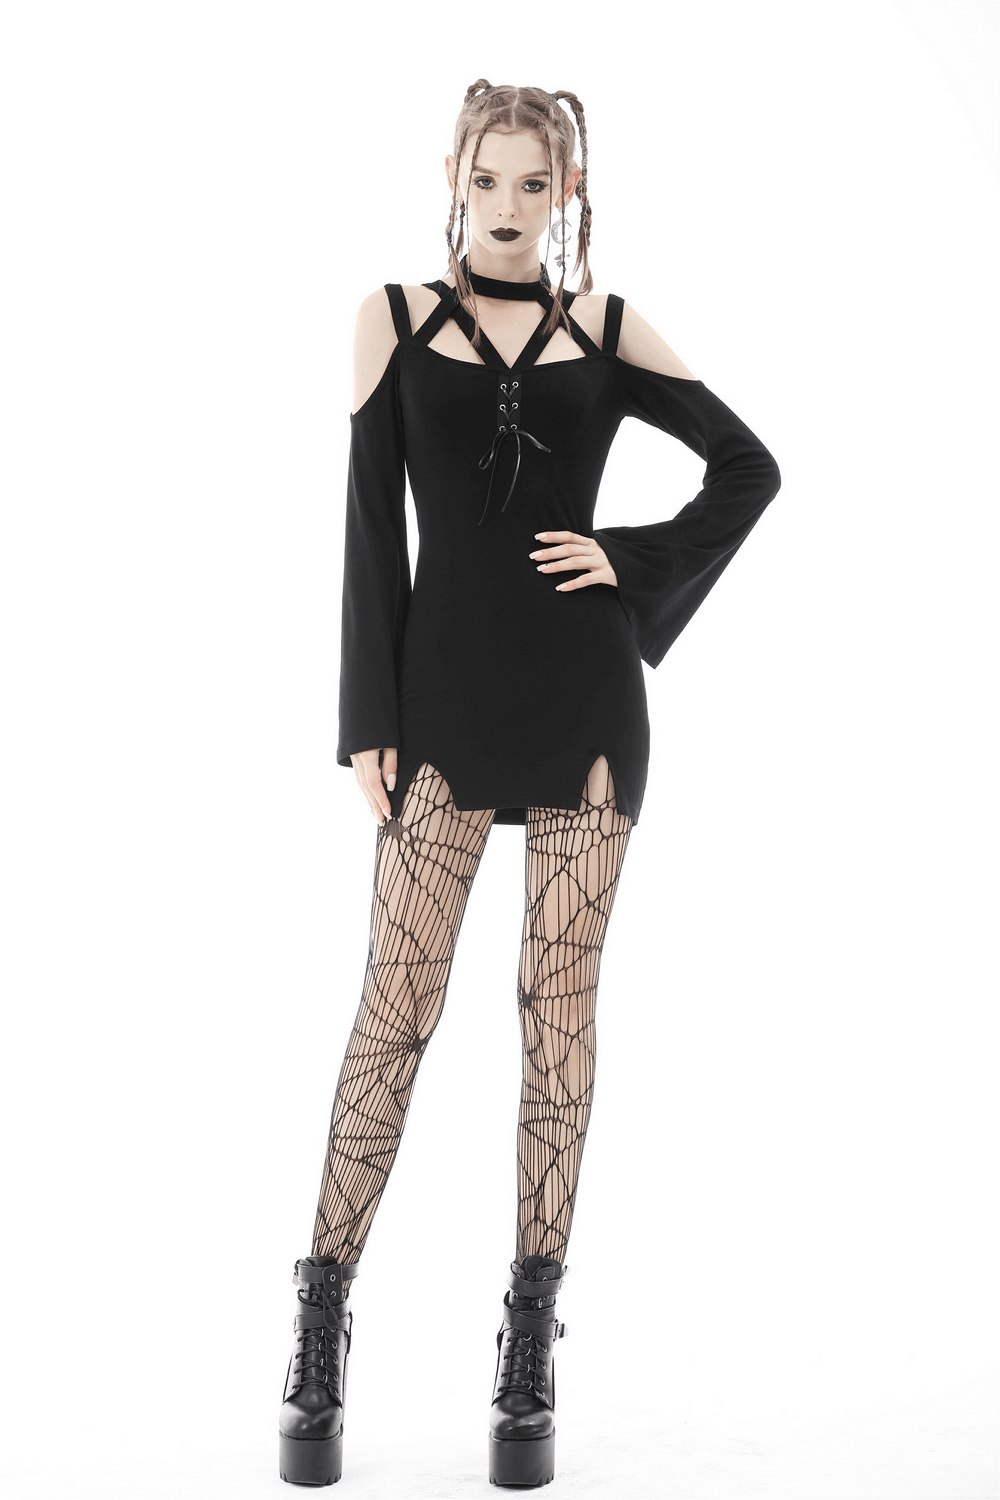 Dark Gothic Lace Up Mini Dress with Shoulder Cutouts